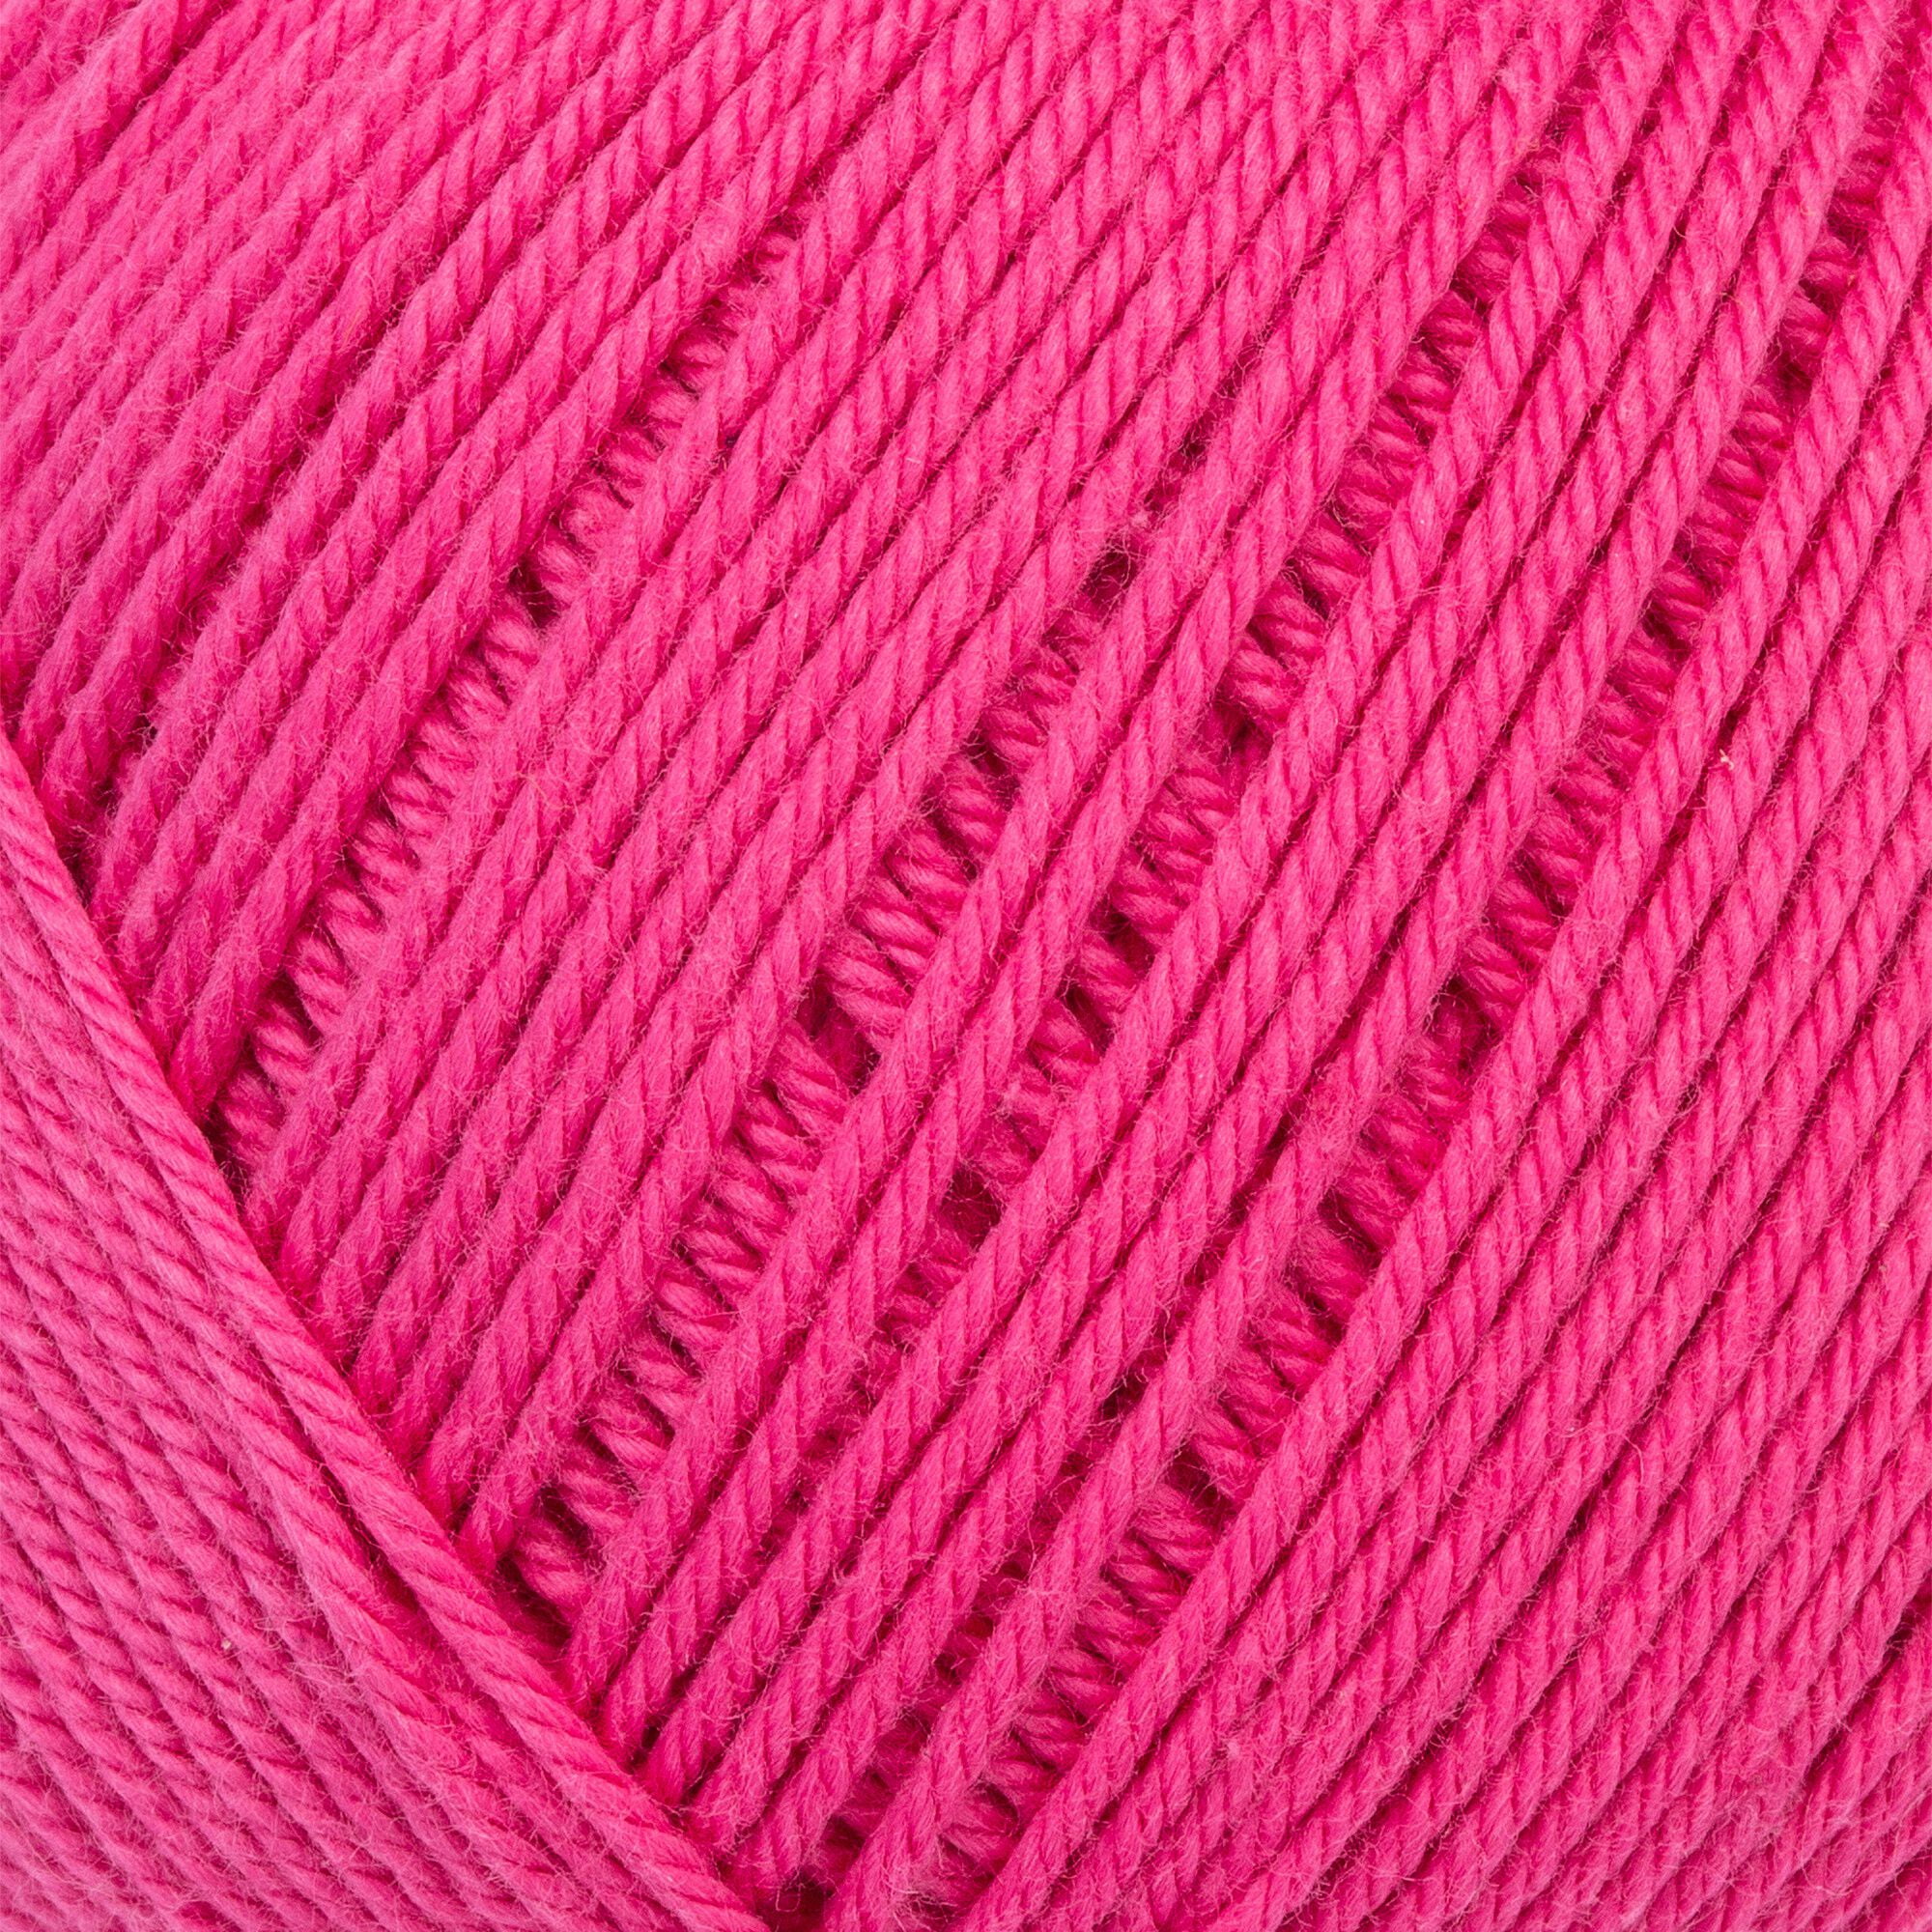 Aunt Lydia's Shaded Pink 300 Yds Crochet Thread Size 10